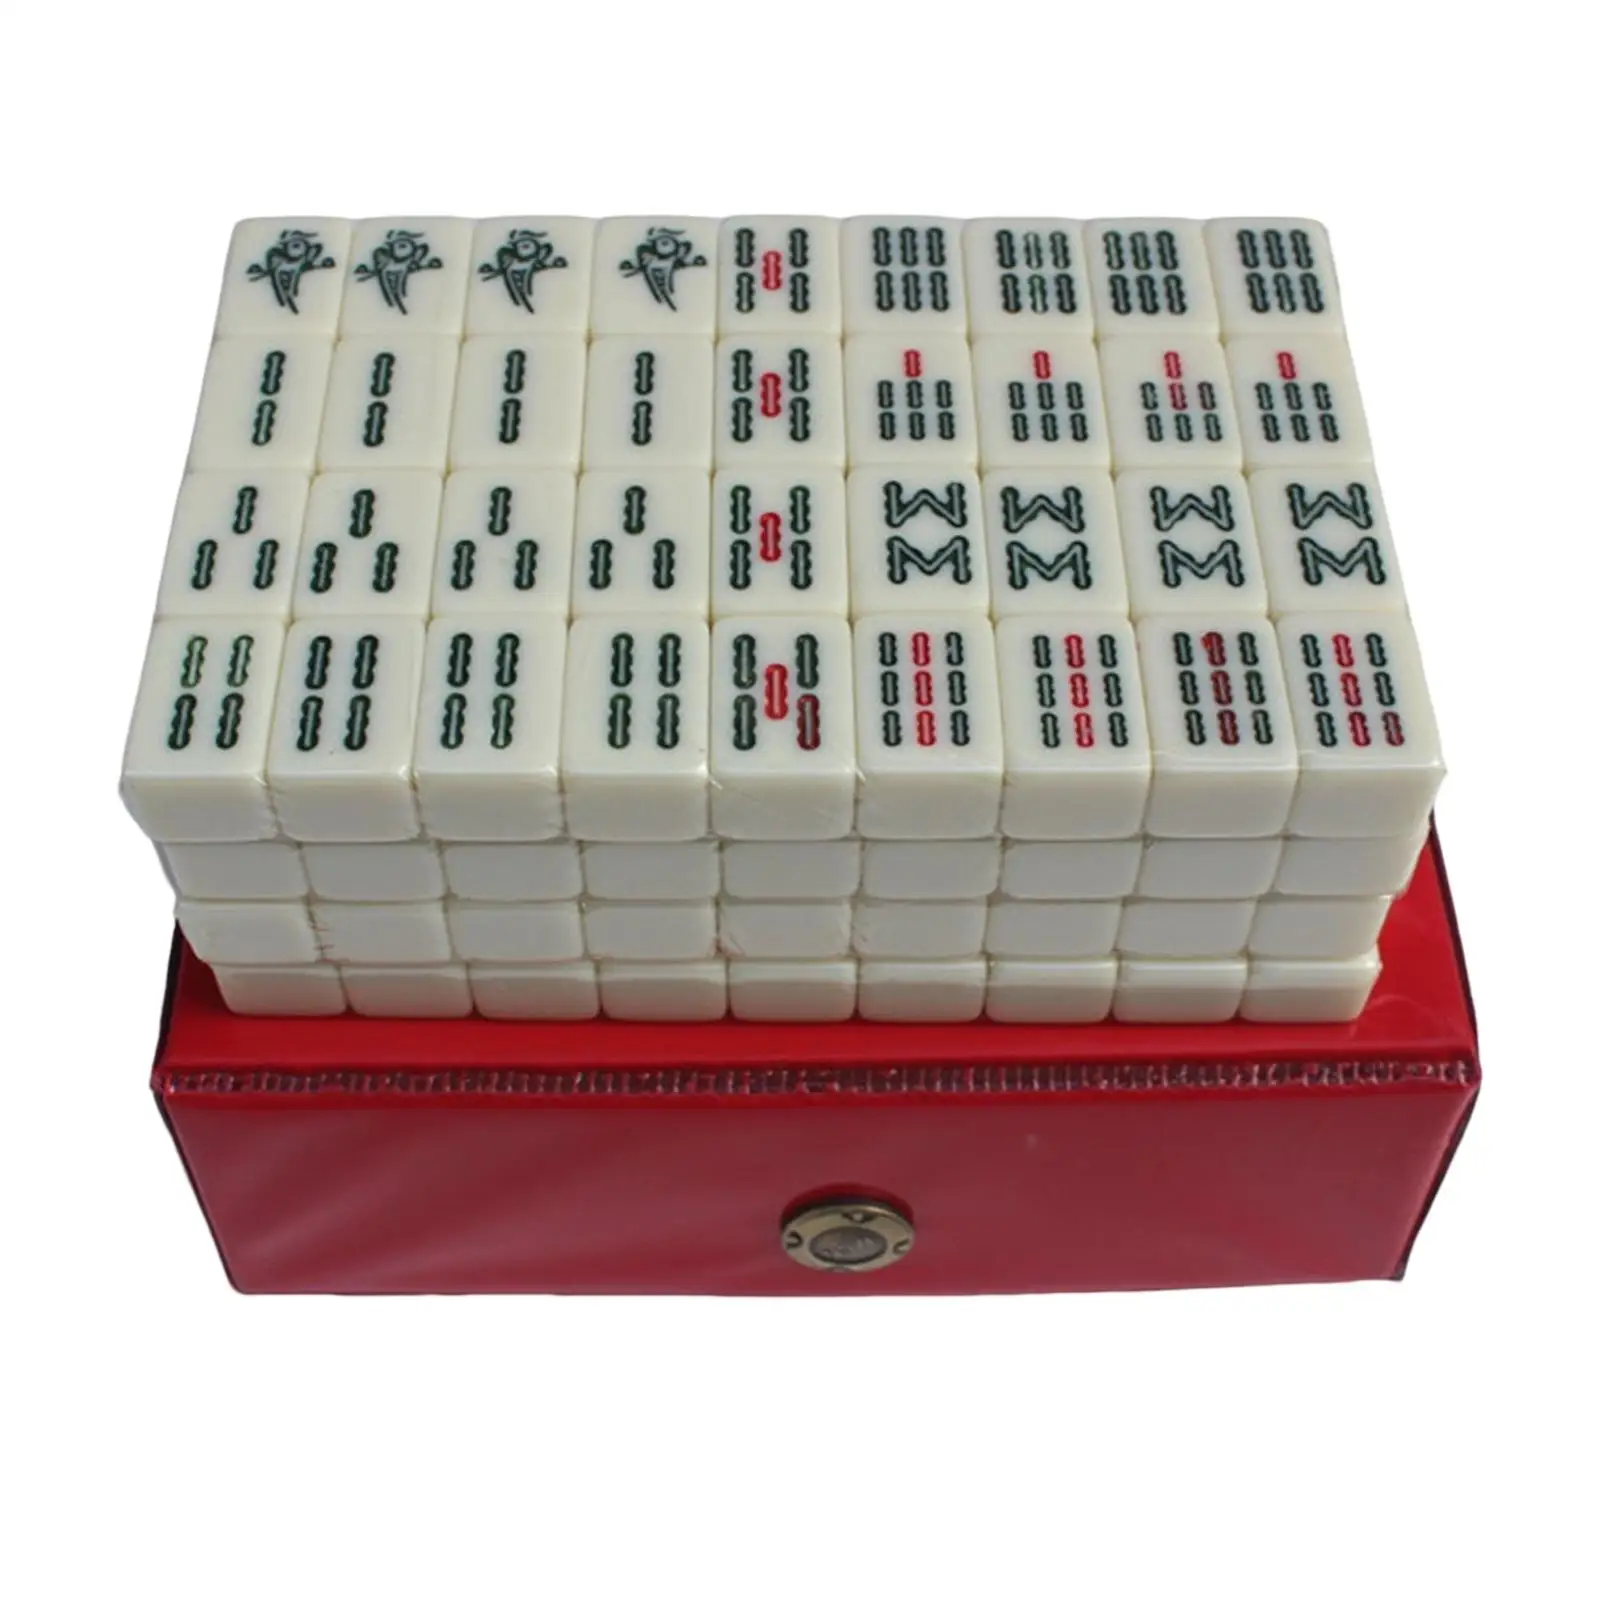 Mini Chinese Mahjong Game Set Board Game with Carrying Case mahjong Tiles Game and 2 Blank Tiles Lightweight for Travel Home